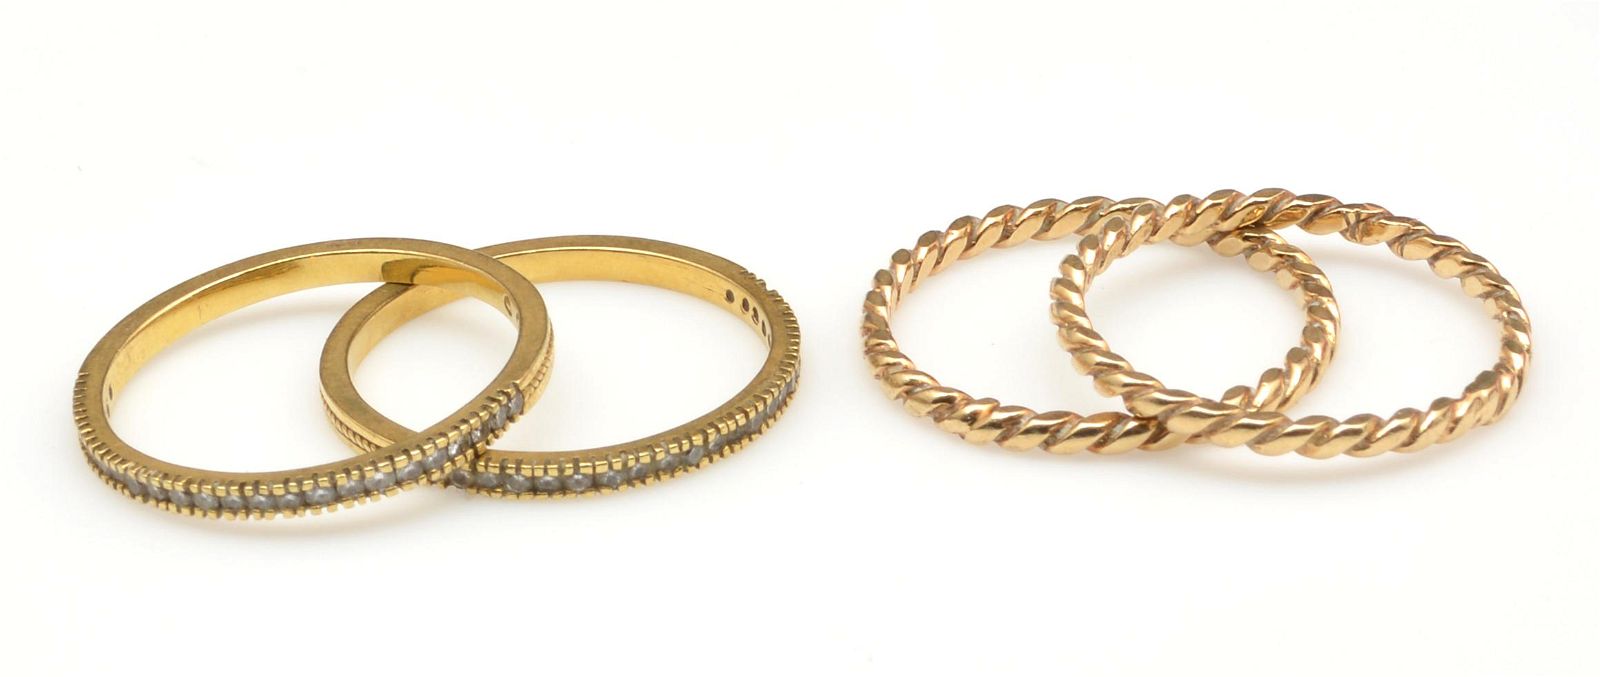 TWO PAIR OF GOLD STACKING RINGS